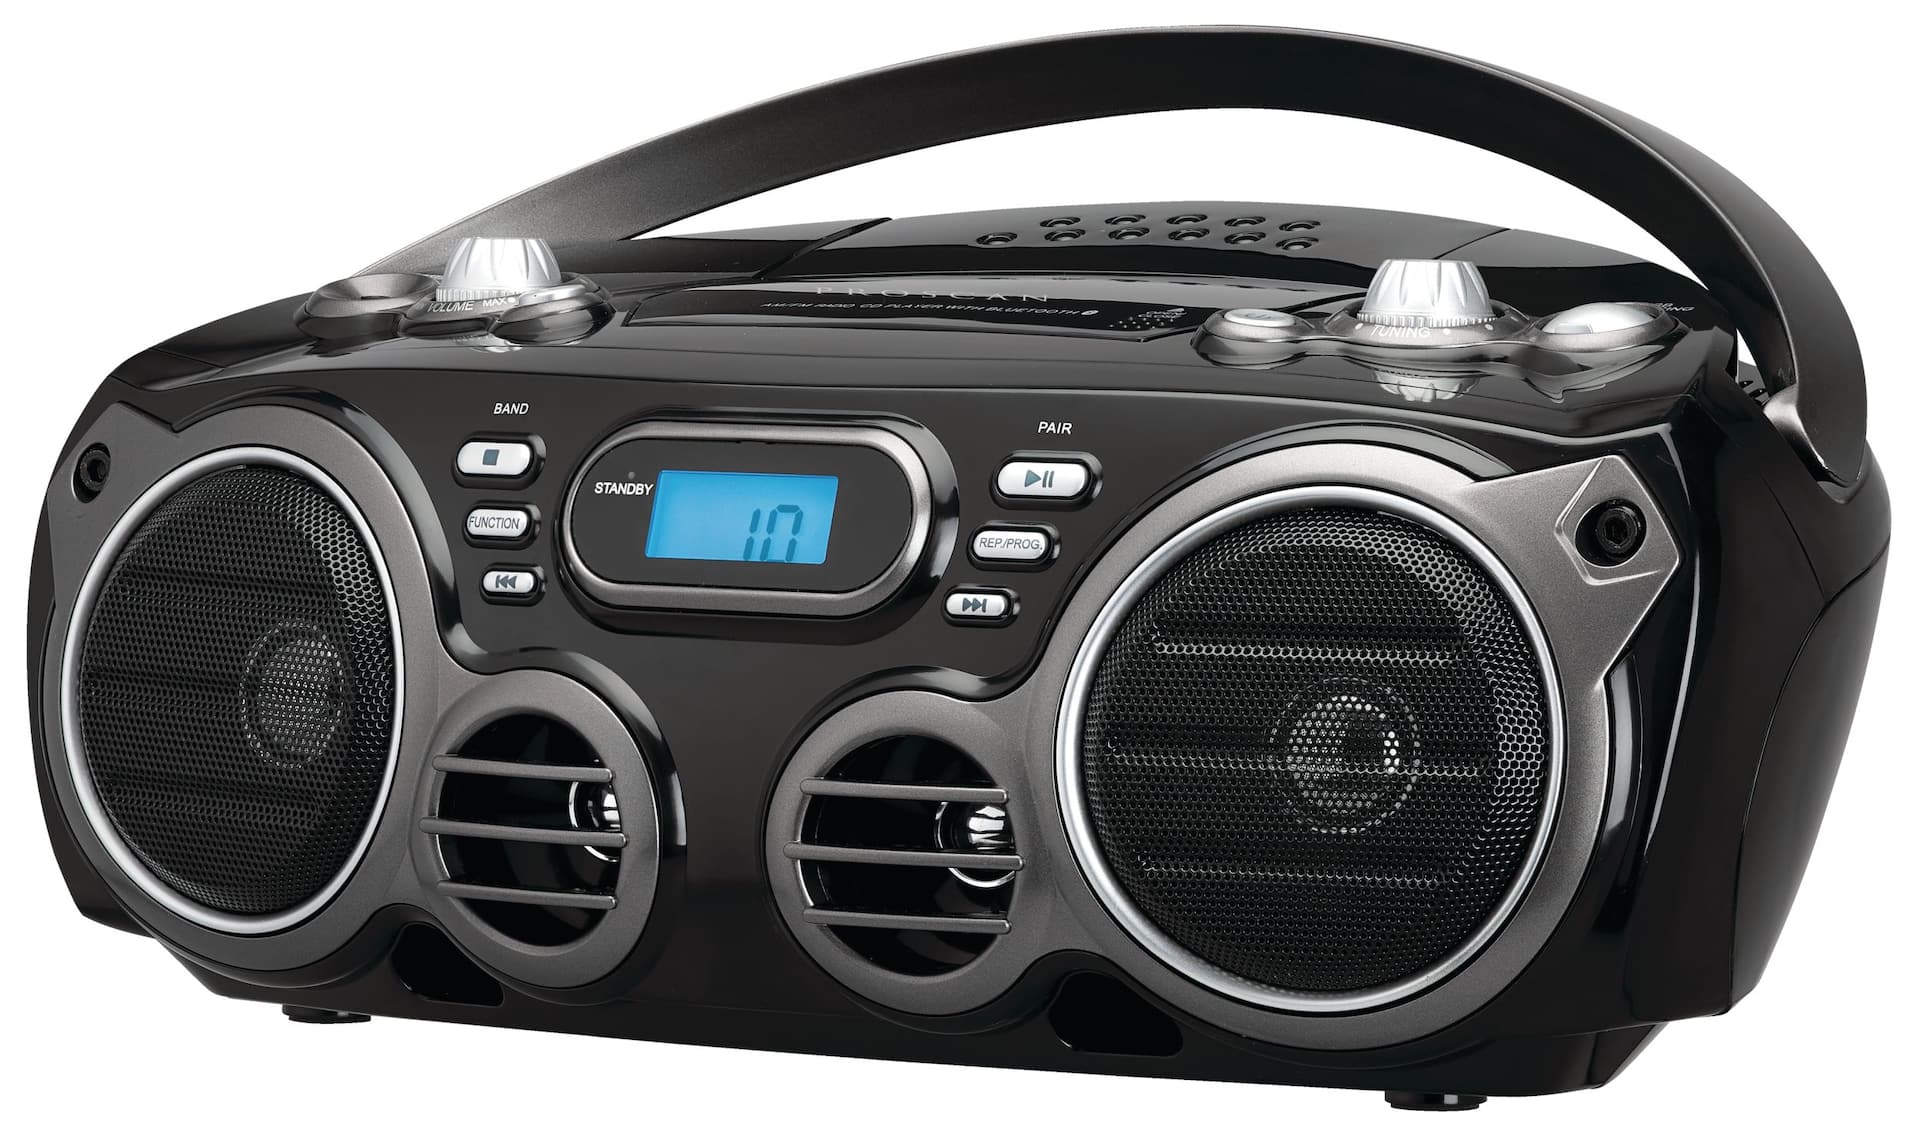 https://media-www.canadiantire.ca/product/living/electronics/home-entertainment-systems/0440291/proscan-portable-bluetooth-cd-boombox-with-usb-charging-b469382f-c384-49da-8ebc-a8f24ebdb649-jpgrendition.jpg